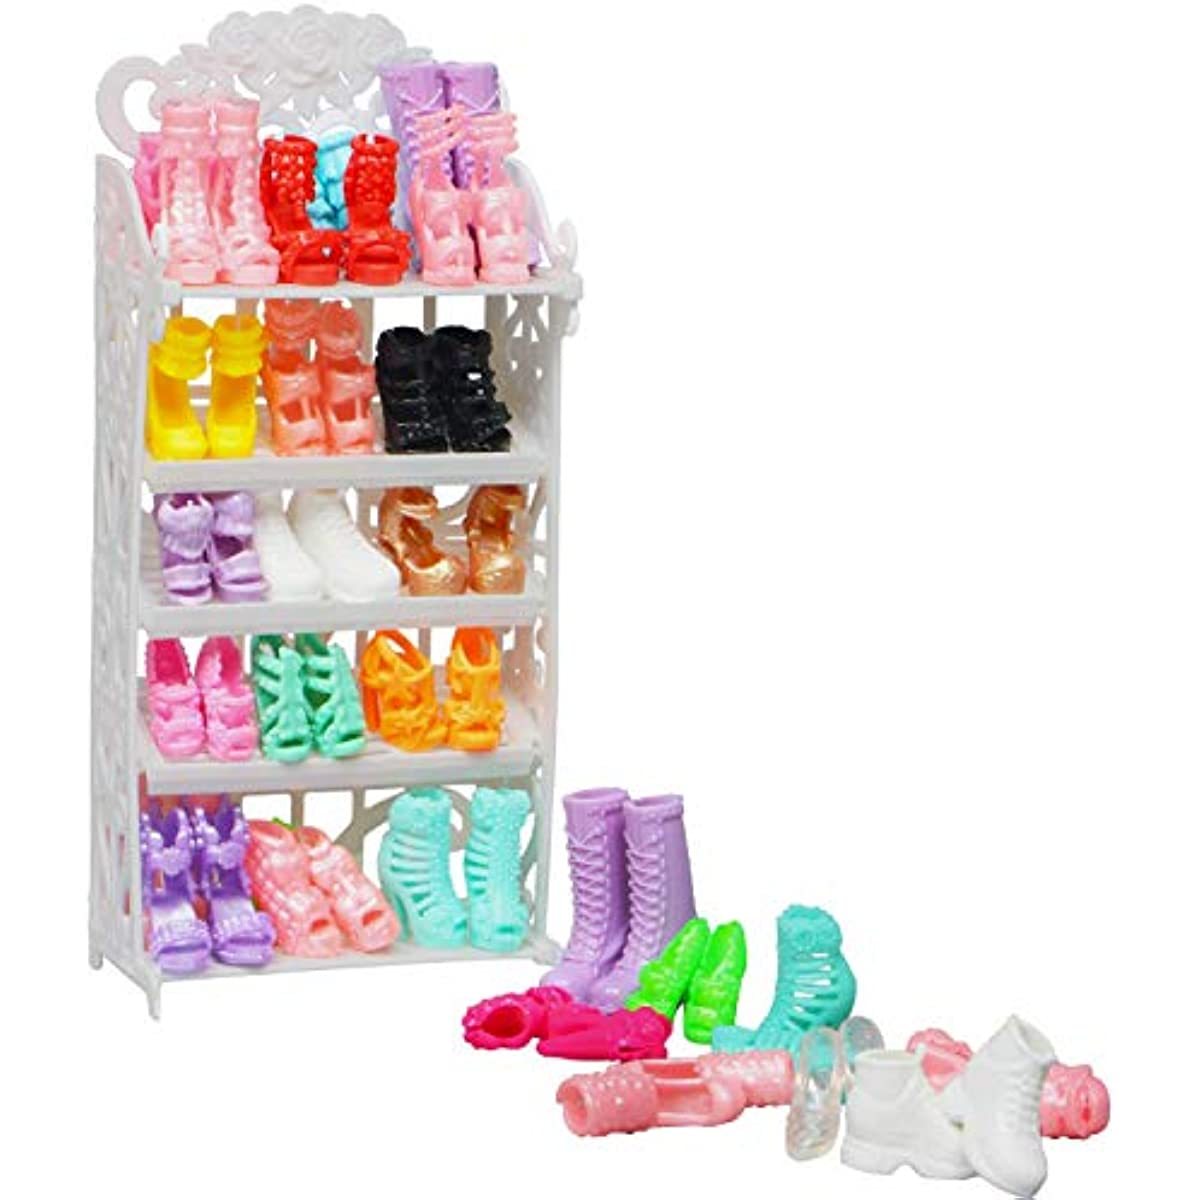 

Complete Doll Shoe Collection: 10 Pairs Of High Heel Boots, Sandals, And More For 11.5 Inch Girl Dolls!